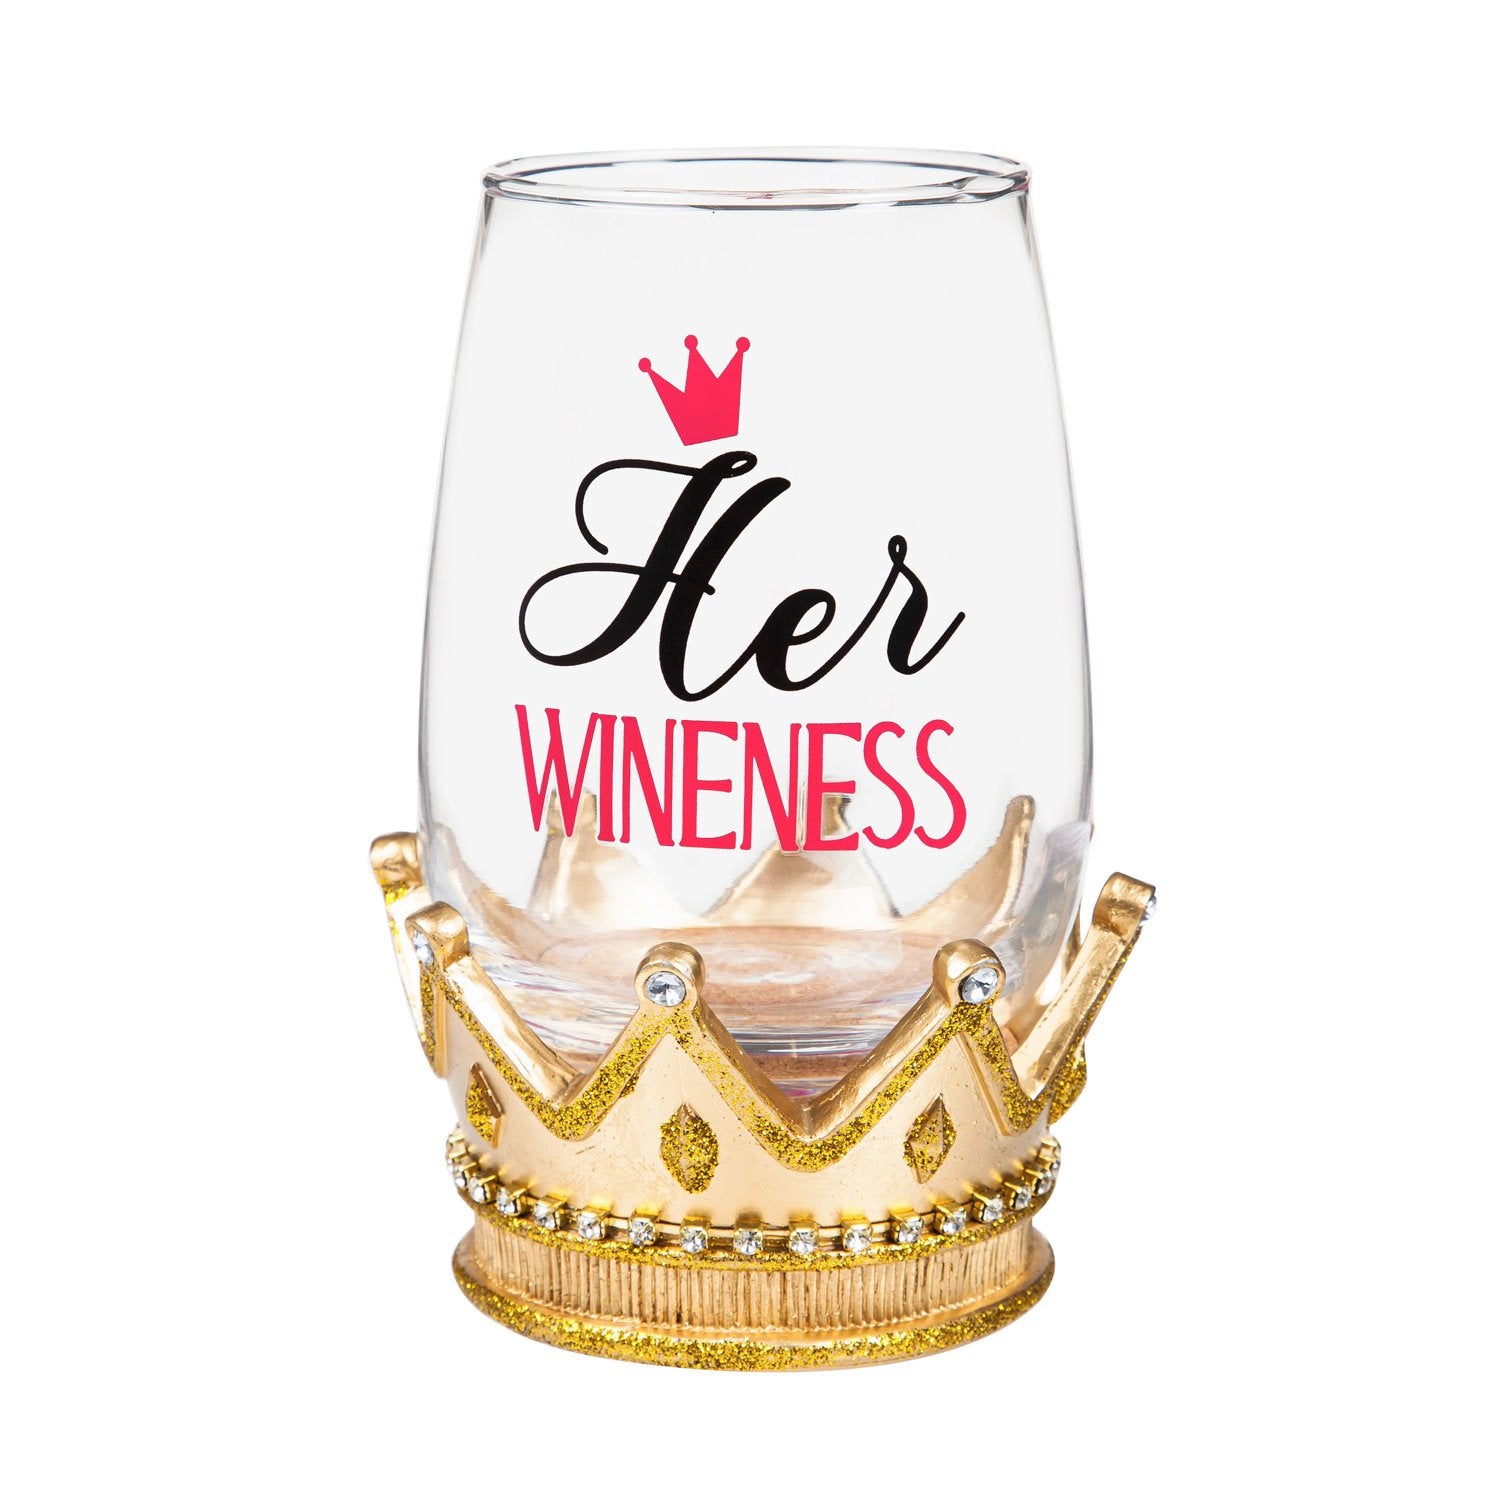 17 OZ Wine Glass with Coaster Base, Her Wineness